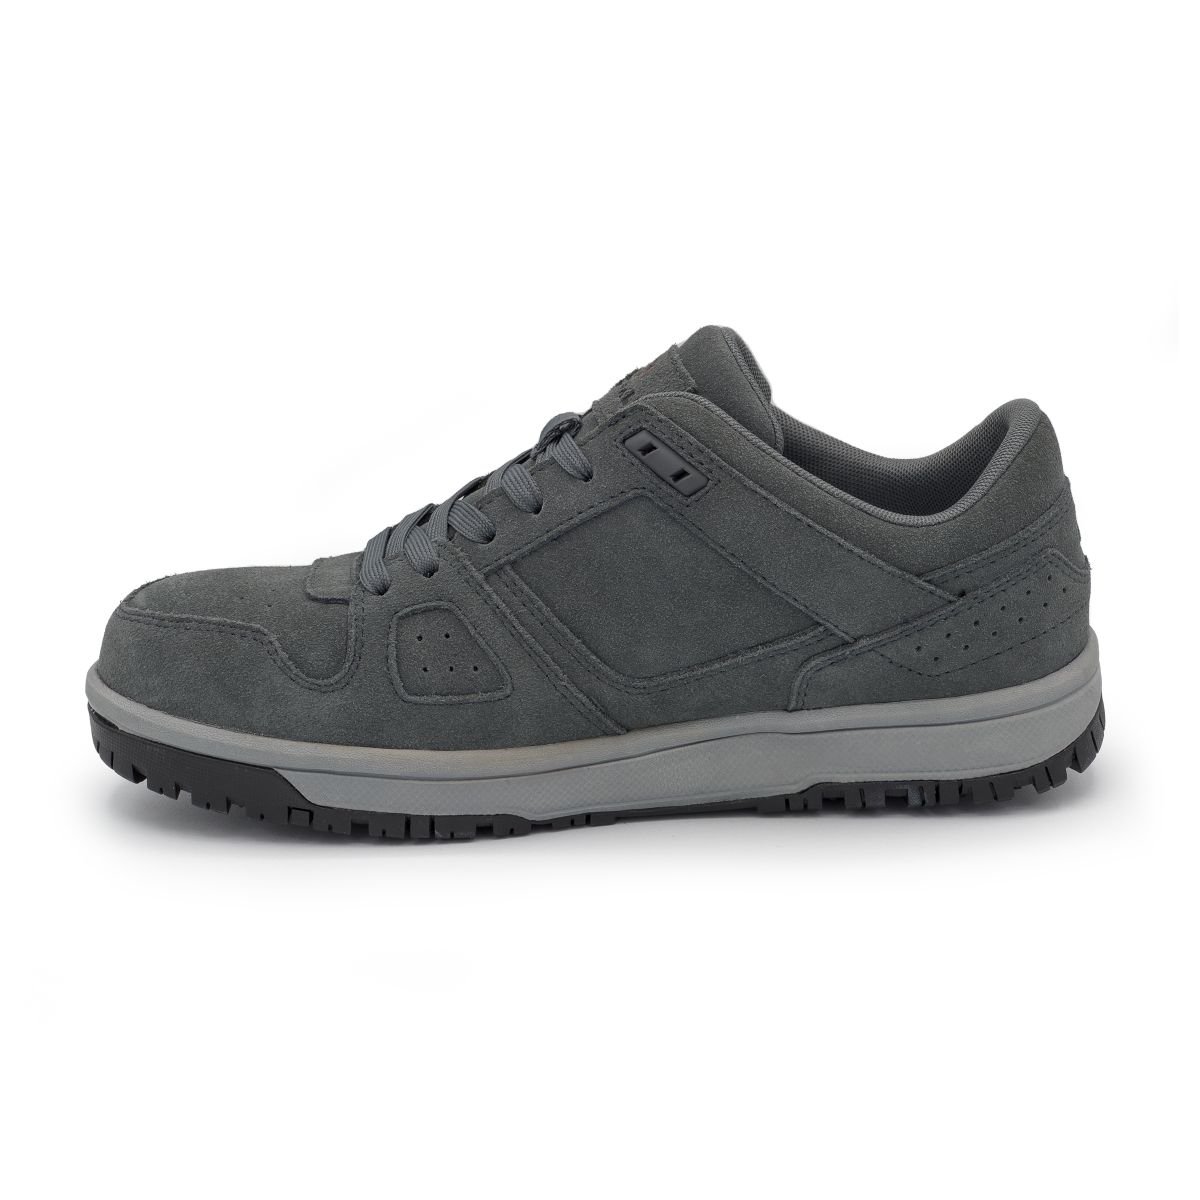 AIRWALK SAFETY Men's Mongo Composite Toe EH Work Shoe Charcoal/Grey - AW6301 CHARCOAL/GRAY - CHARCOAL/GRAY, 14-W